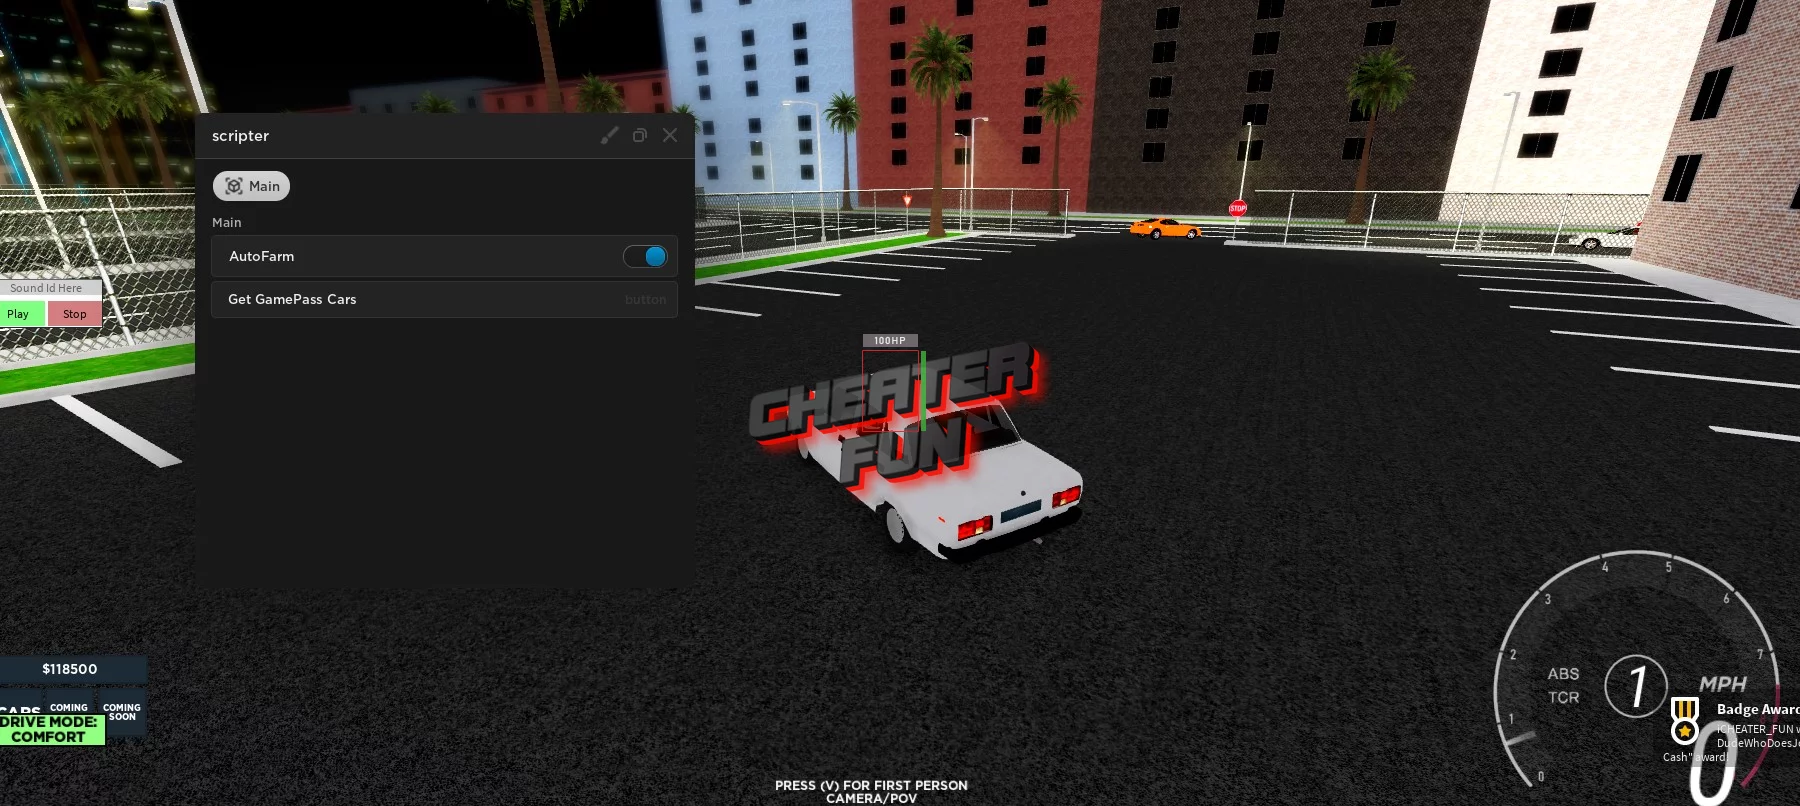 Everyday Car Driving - Roblox